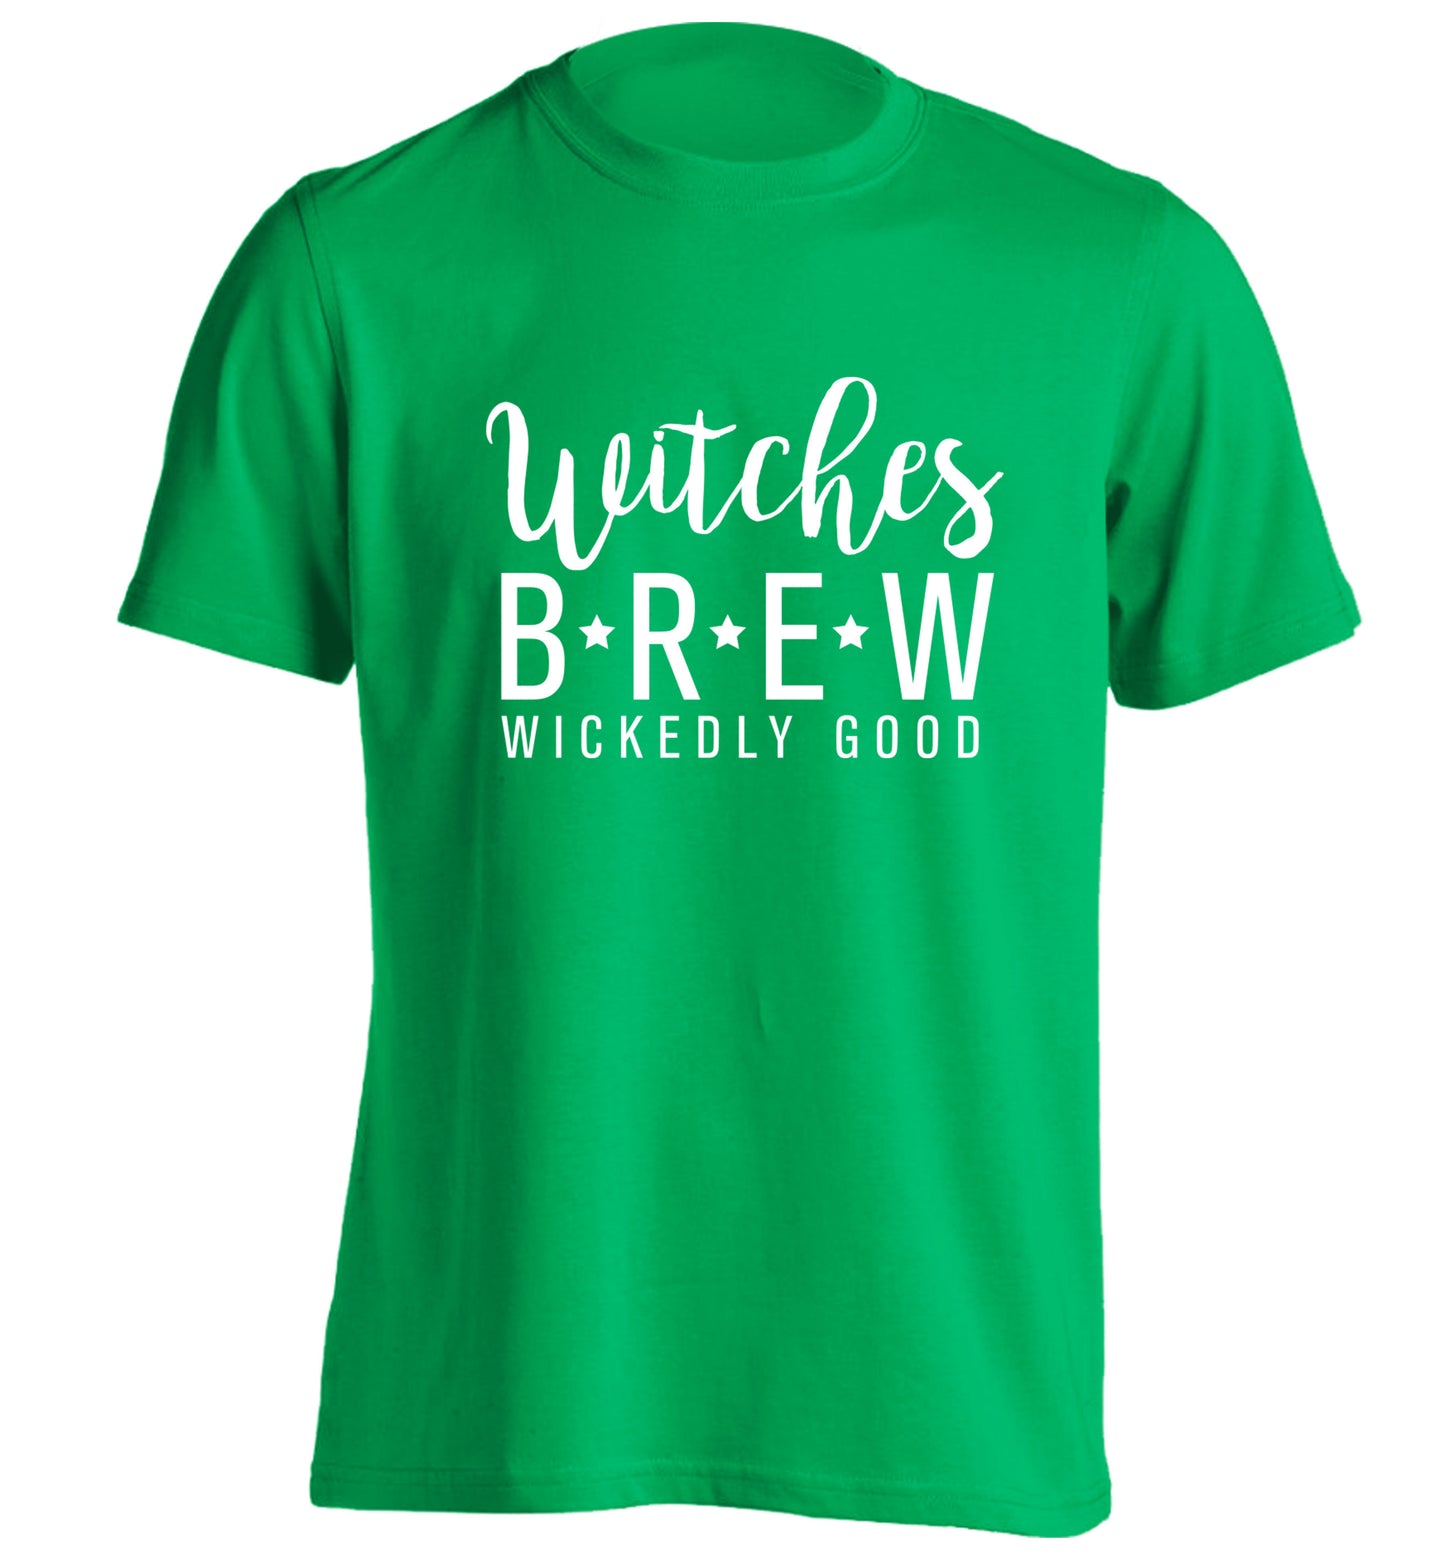 Witches Brew wickedly good adults unisex green Tshirt 2XL